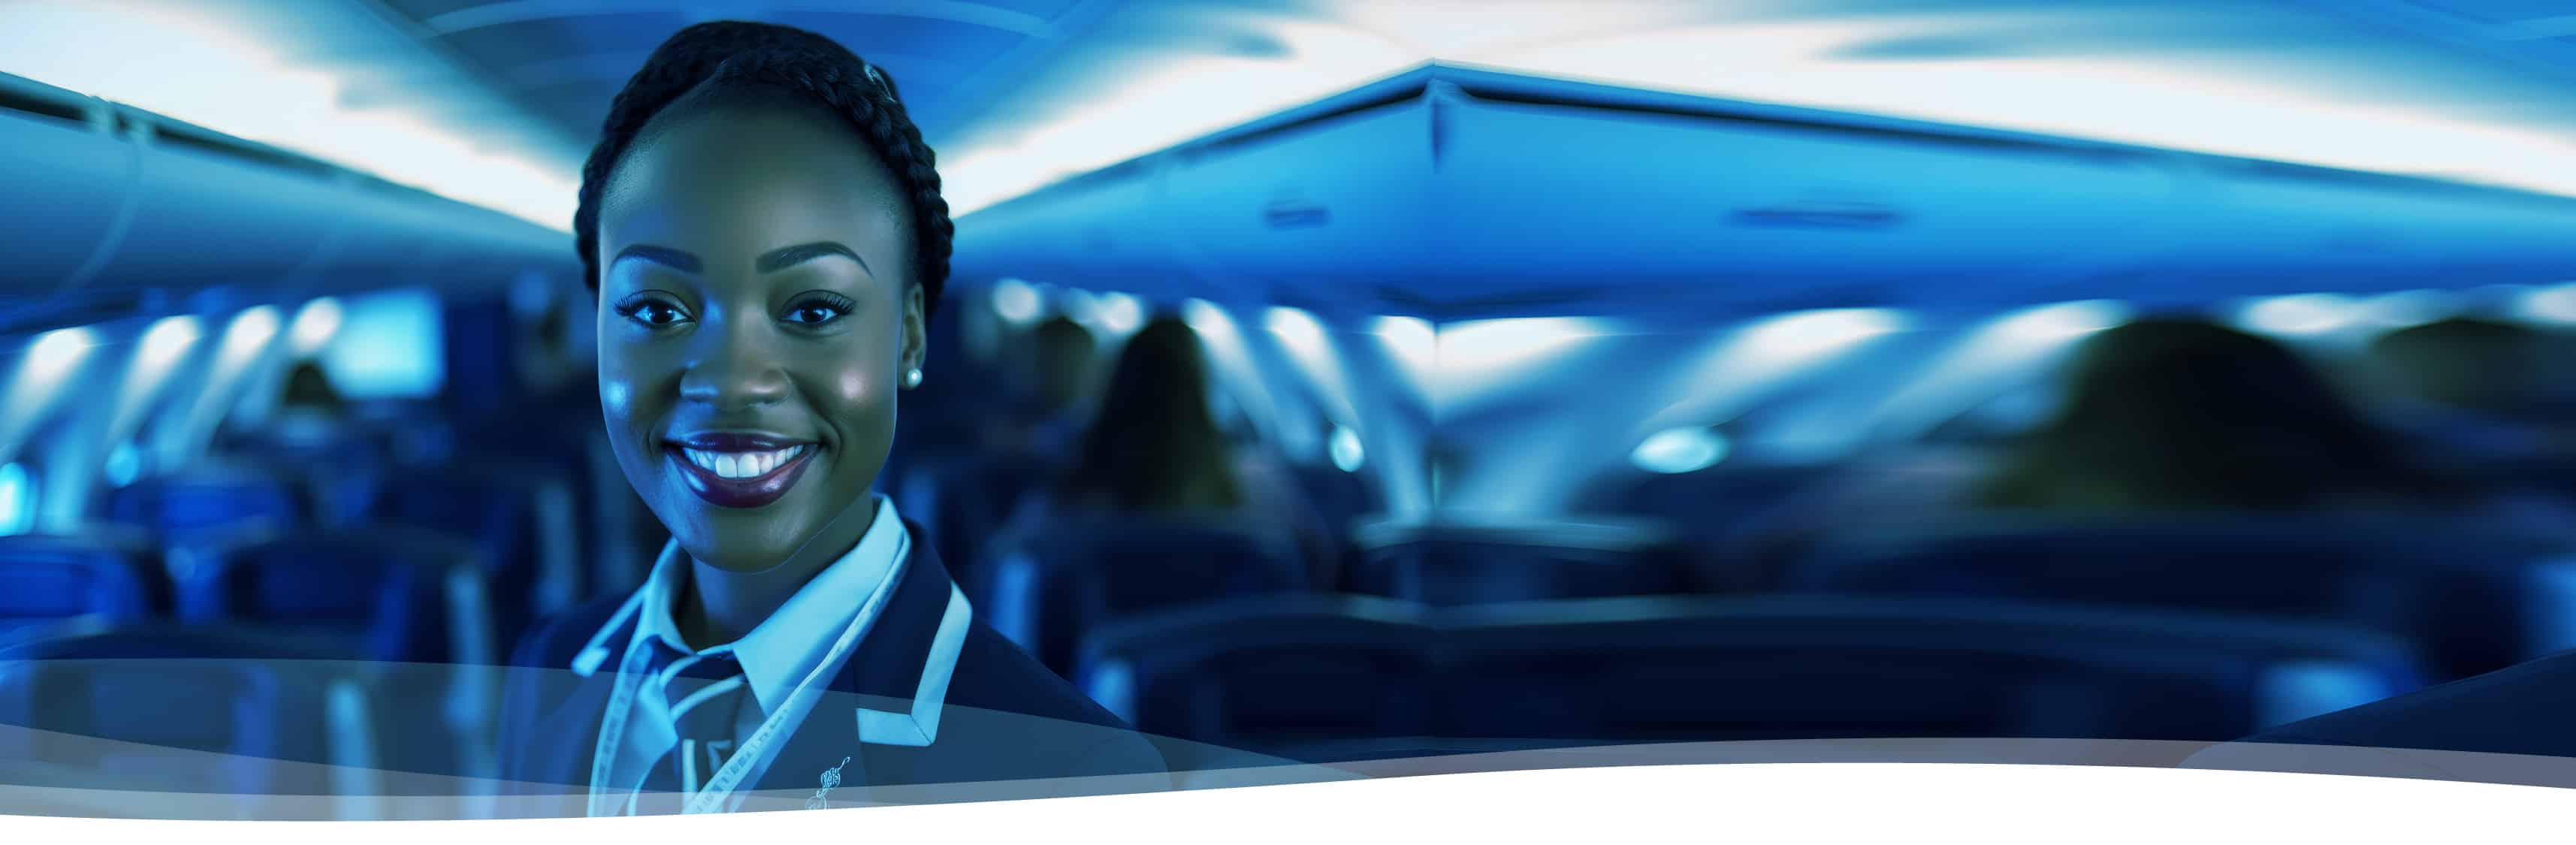 Ethiopian Airlines Cabin Crew Interview Questions and Answers Guide